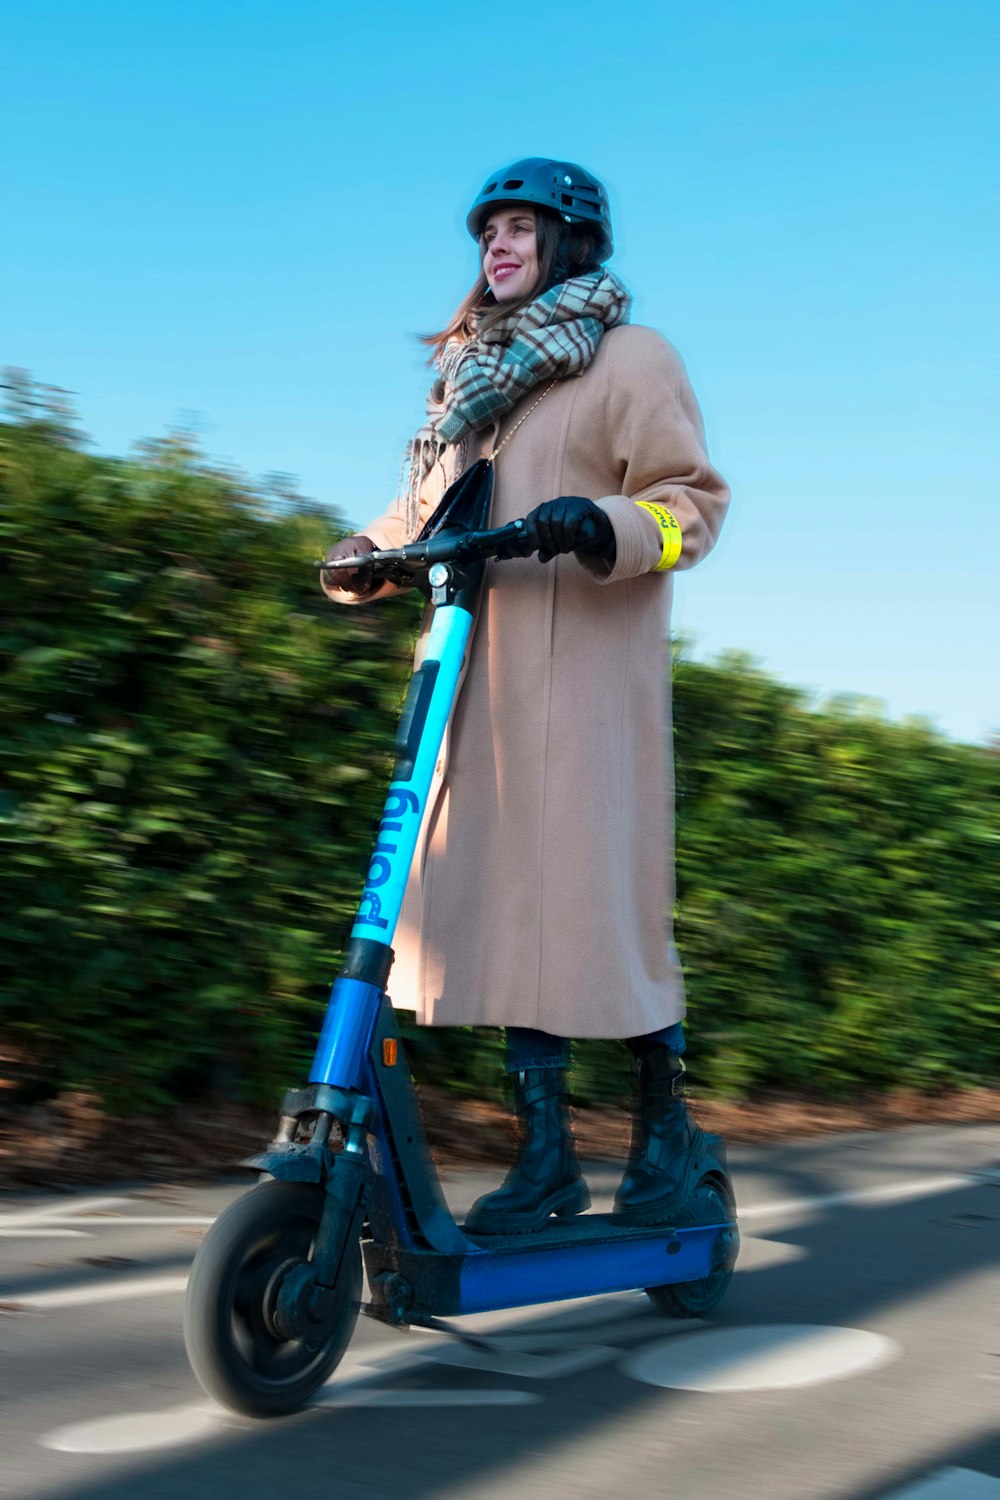 a woman riding a blue scooter down a street